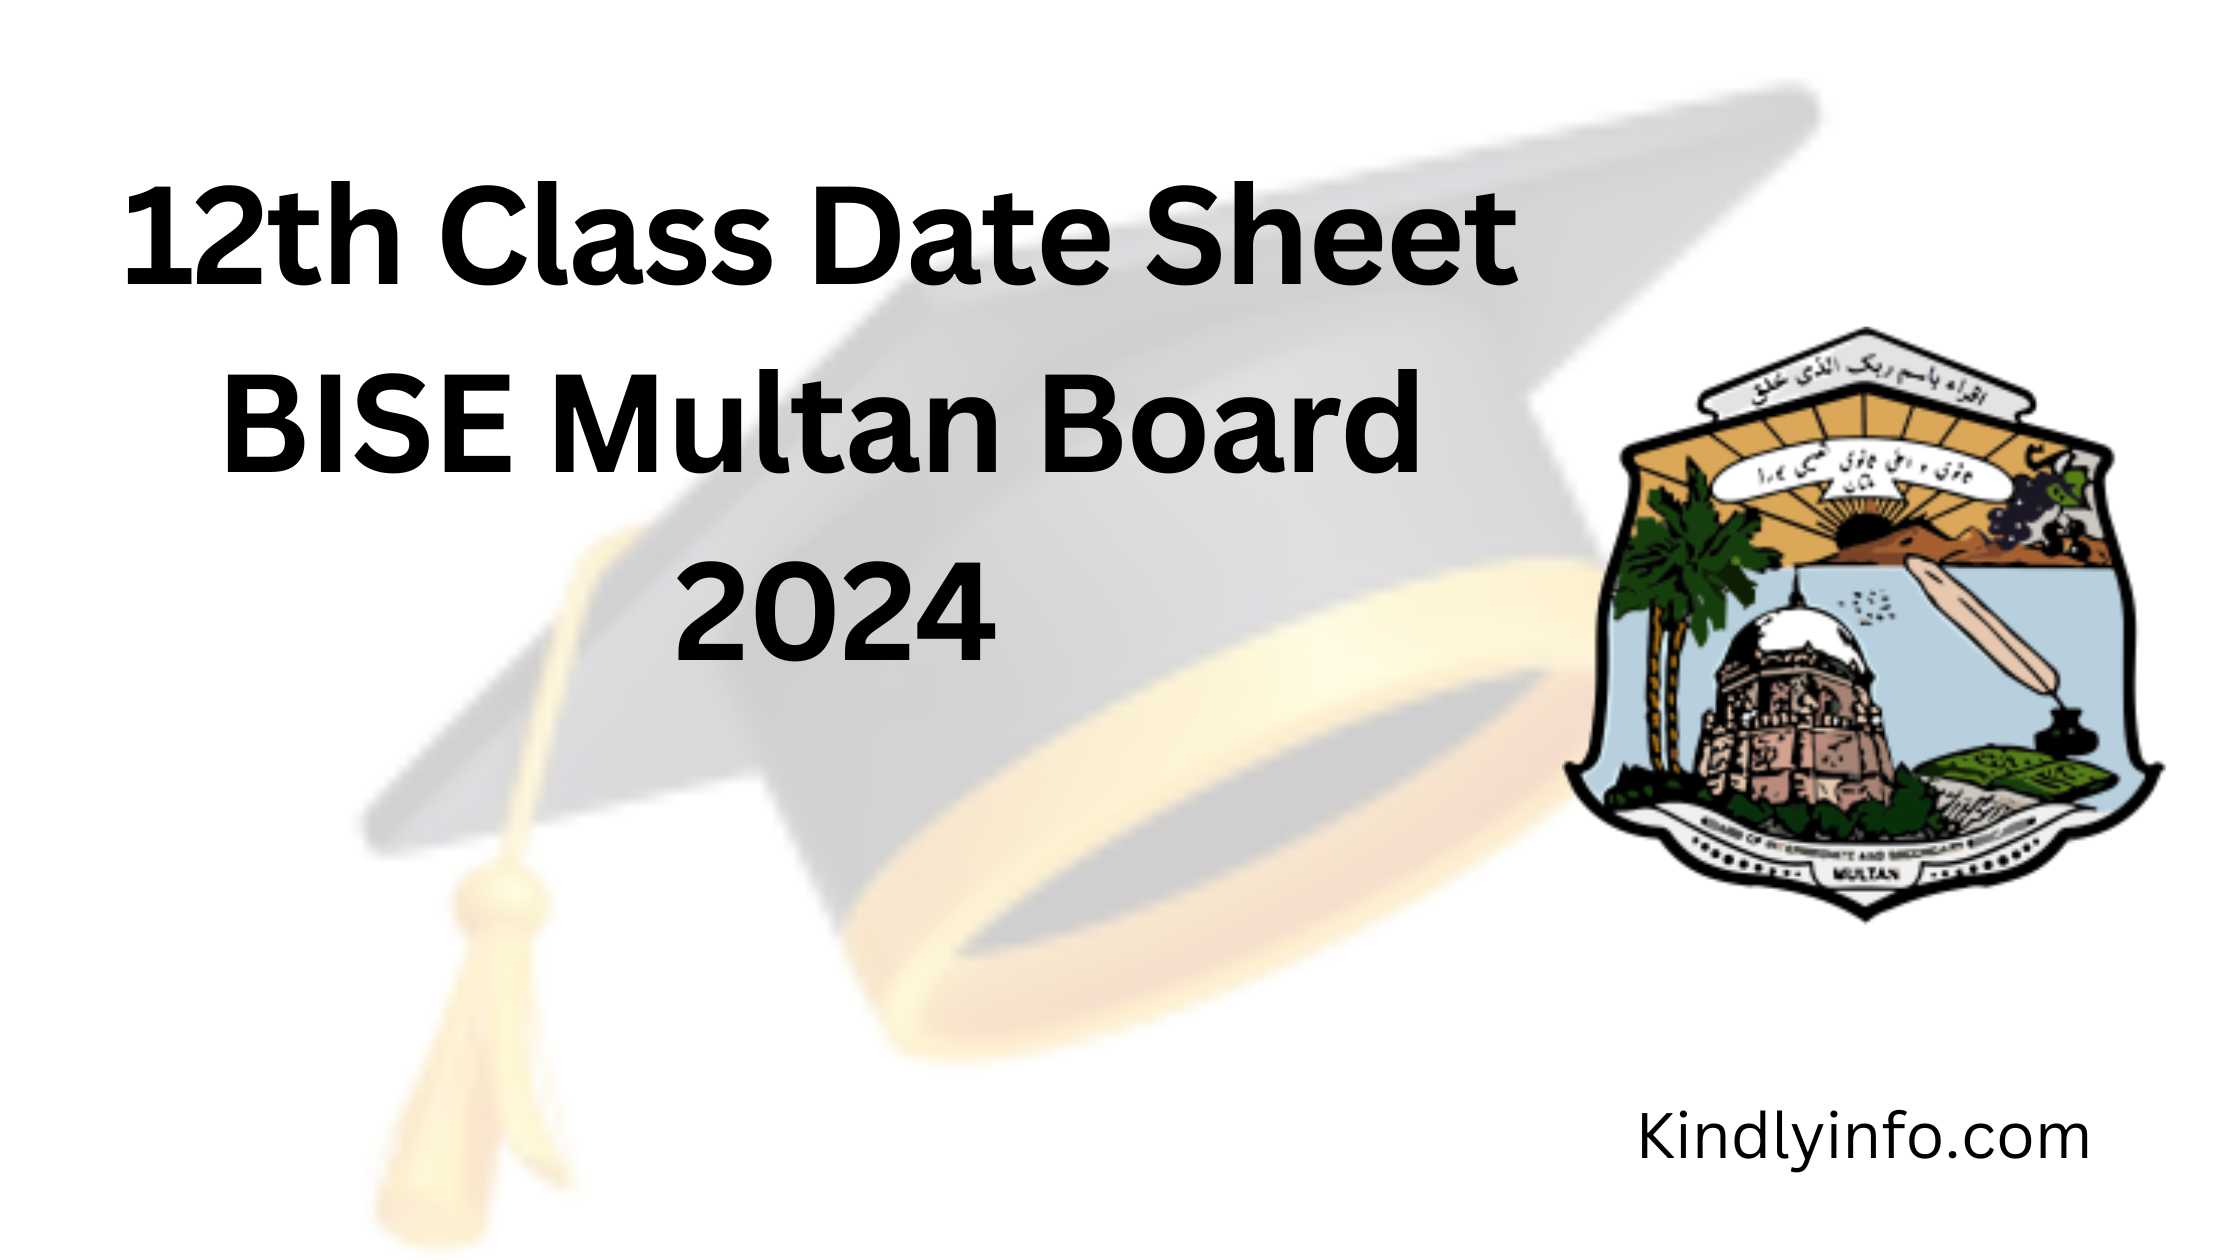 Use the official BISE Multan Board 12th Class Date Sheet 2024 to plan your study strategy and know the exact schedule for upcoming exams.